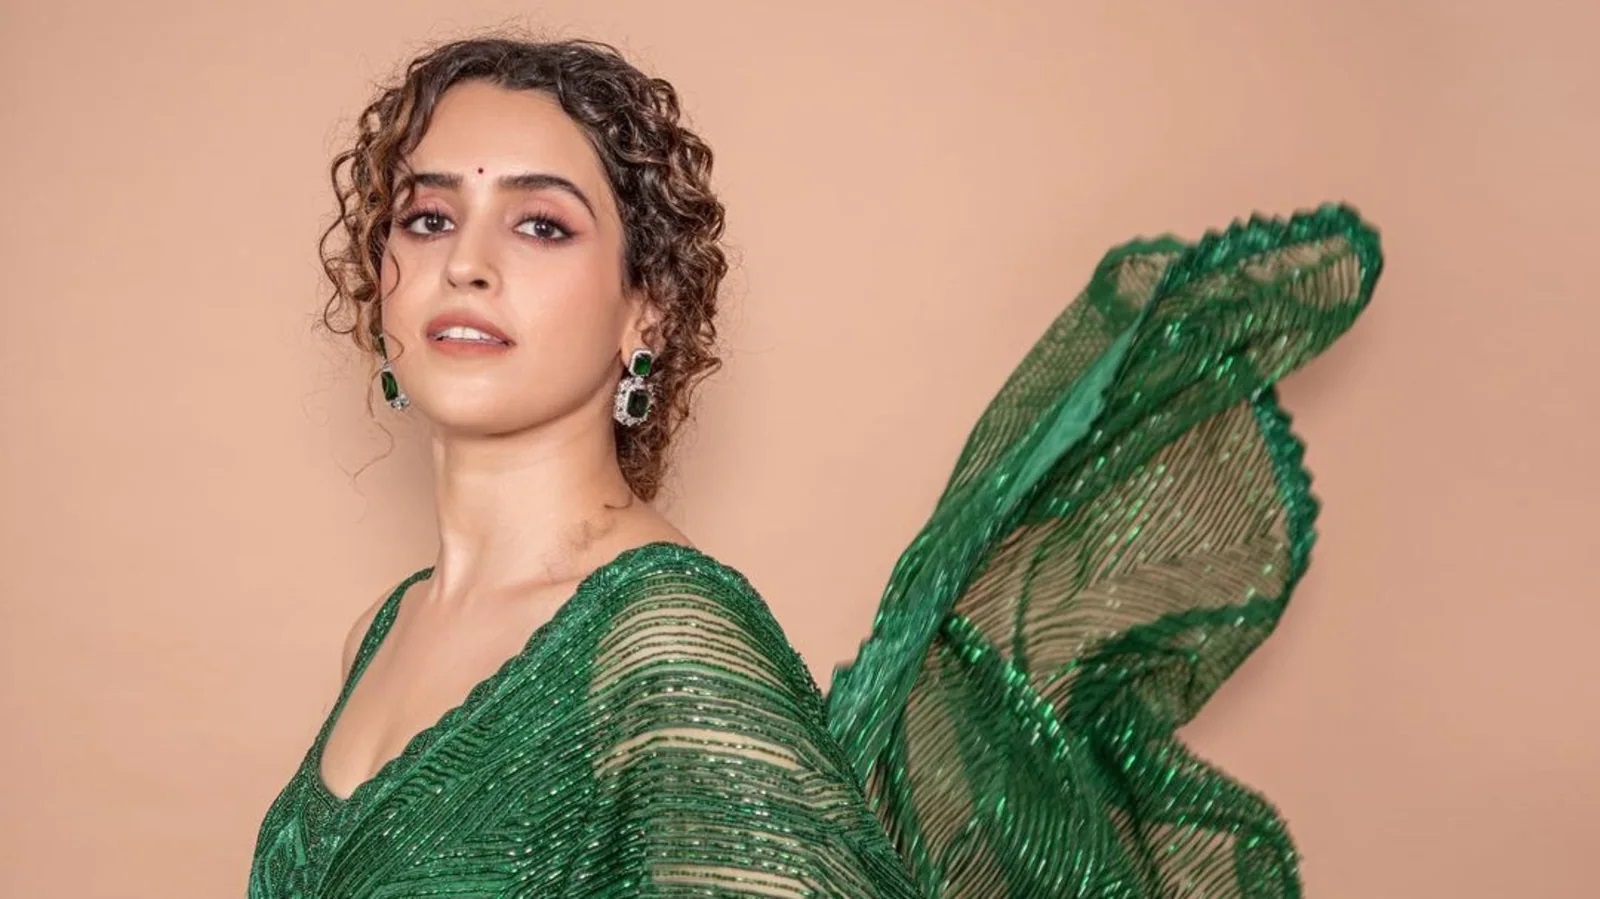 Sanya Malhotra Bikini Pictures: Fans Go 'Wow' After Seeing Her Black And White Post On Instagram And Twitter